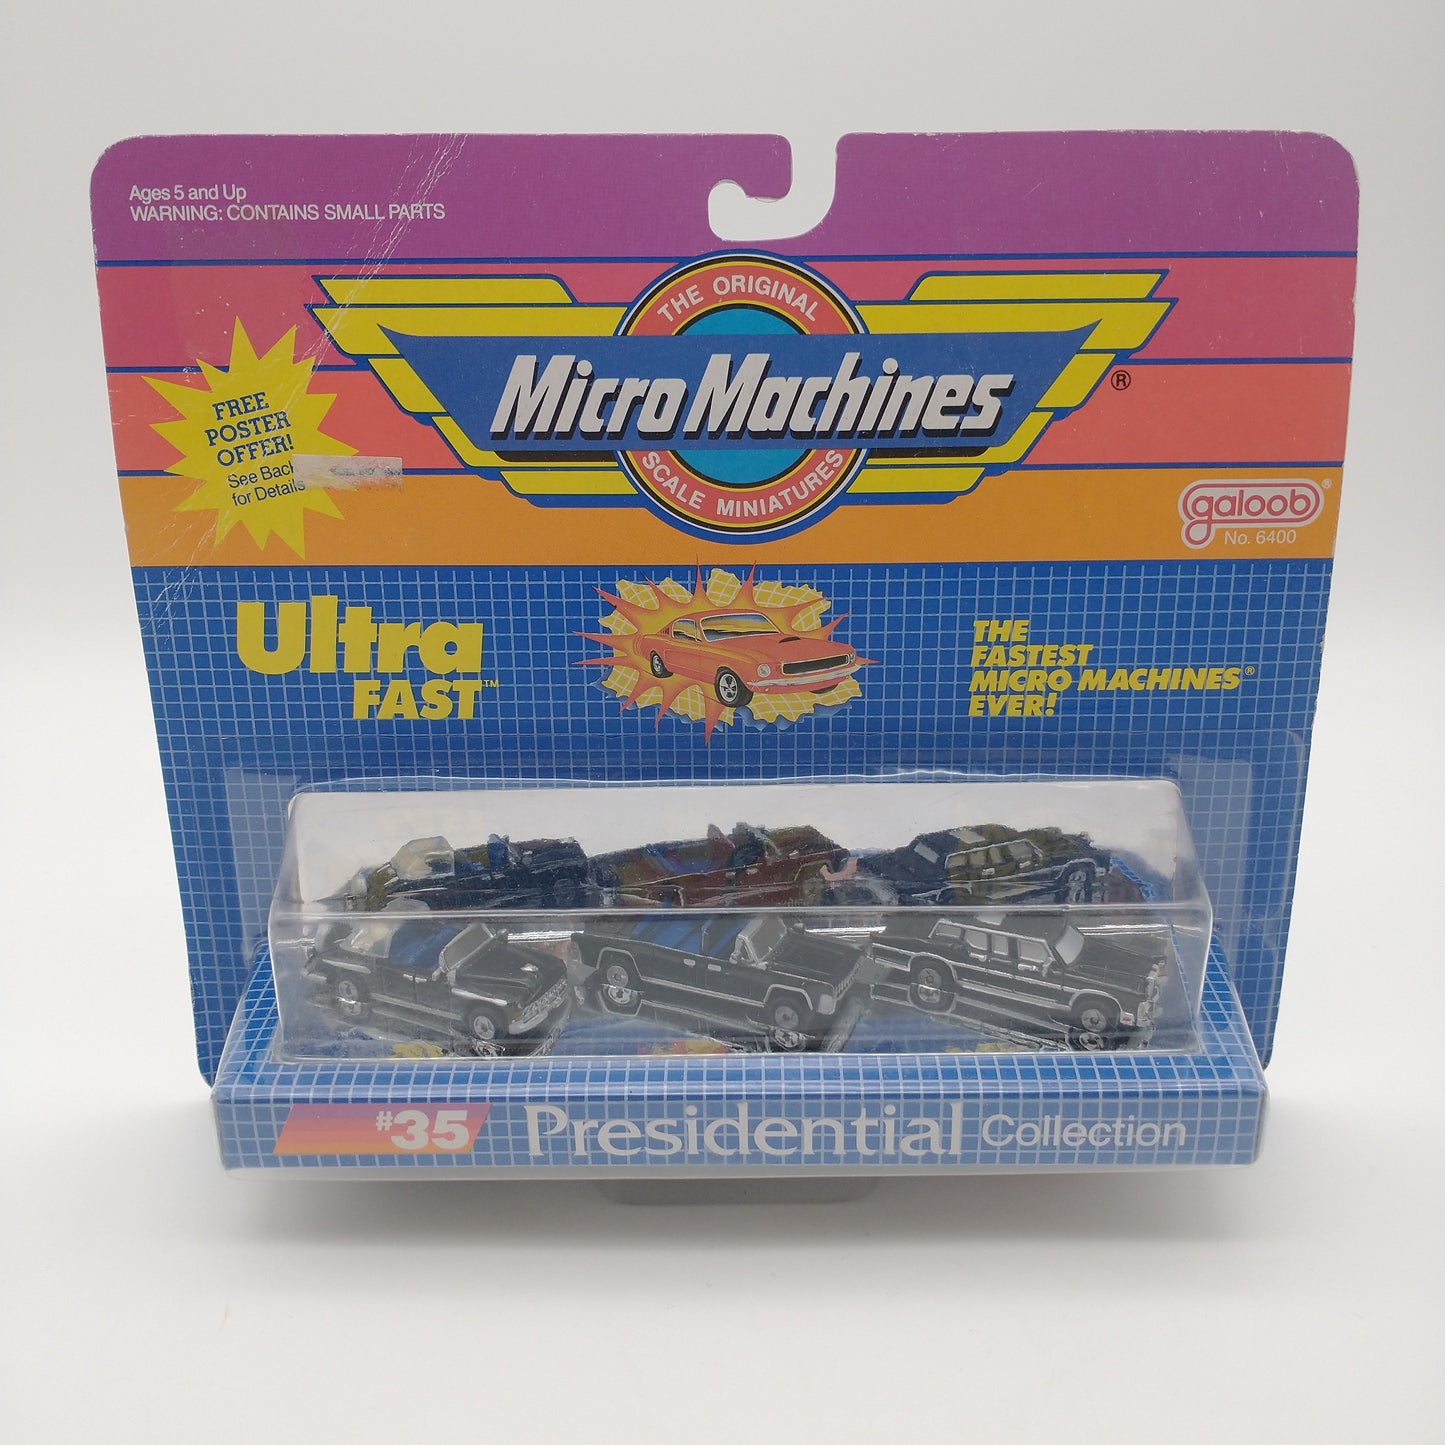 Micro Machines #35 Presidential Collection Galoob 1986